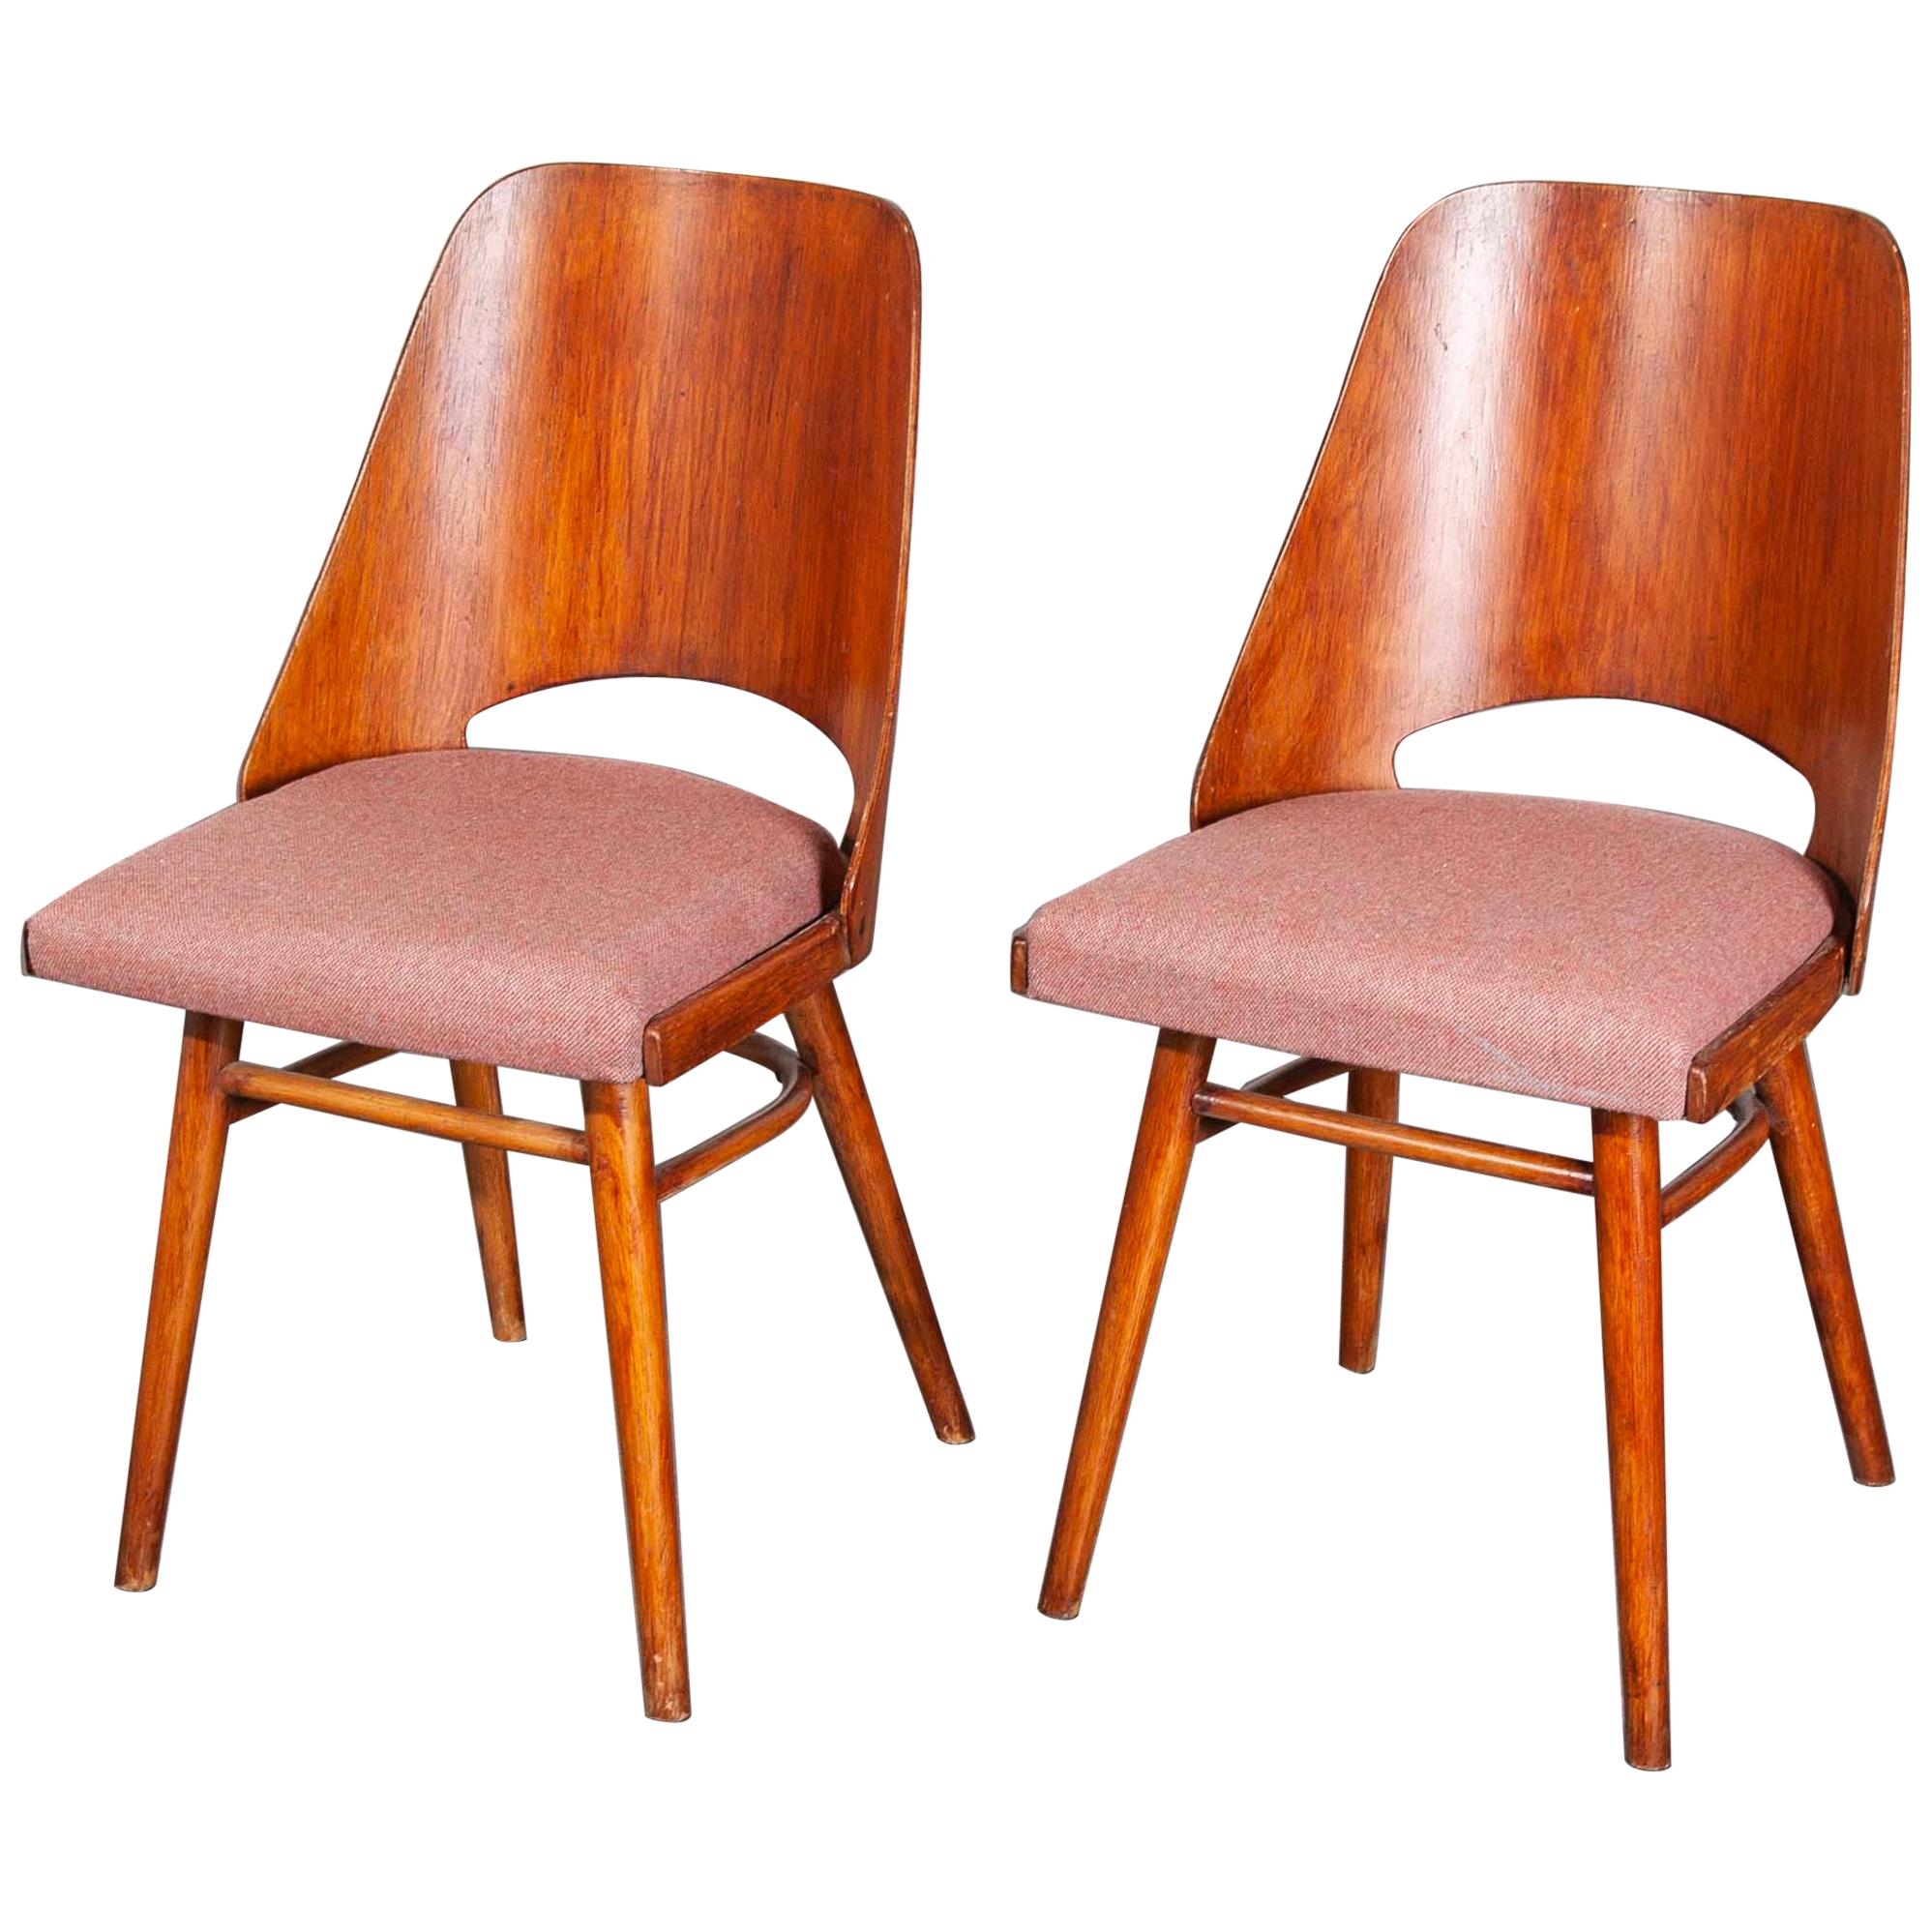 Pair of 1950s Re- Upholstered Thon Dining Chairs, Radomir Hoffman